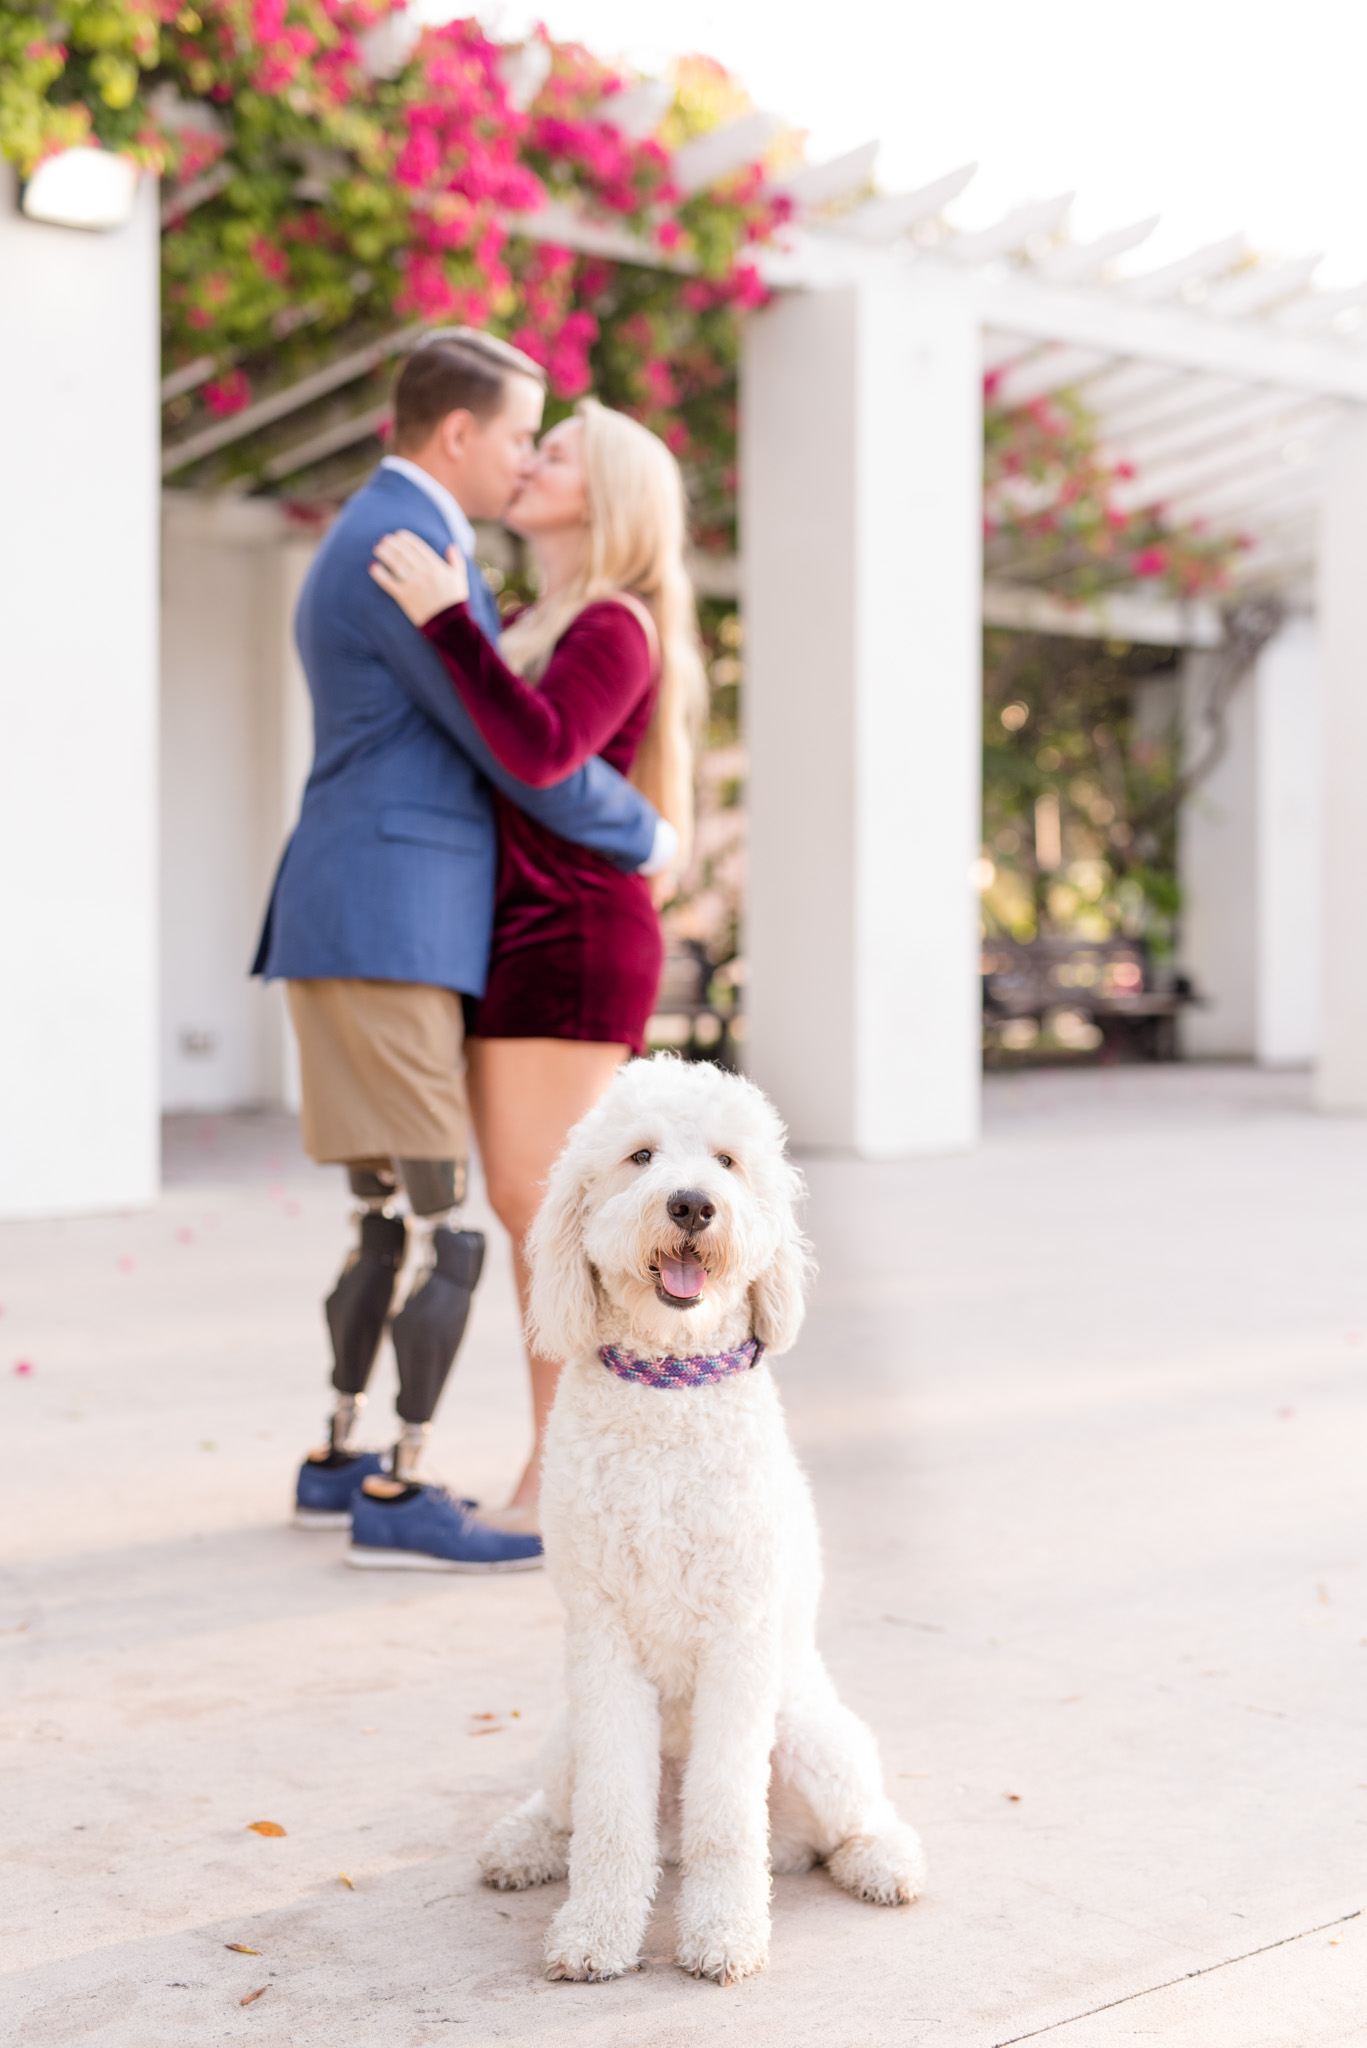 Goldendoodle looks at camera while couple kisses behind her.